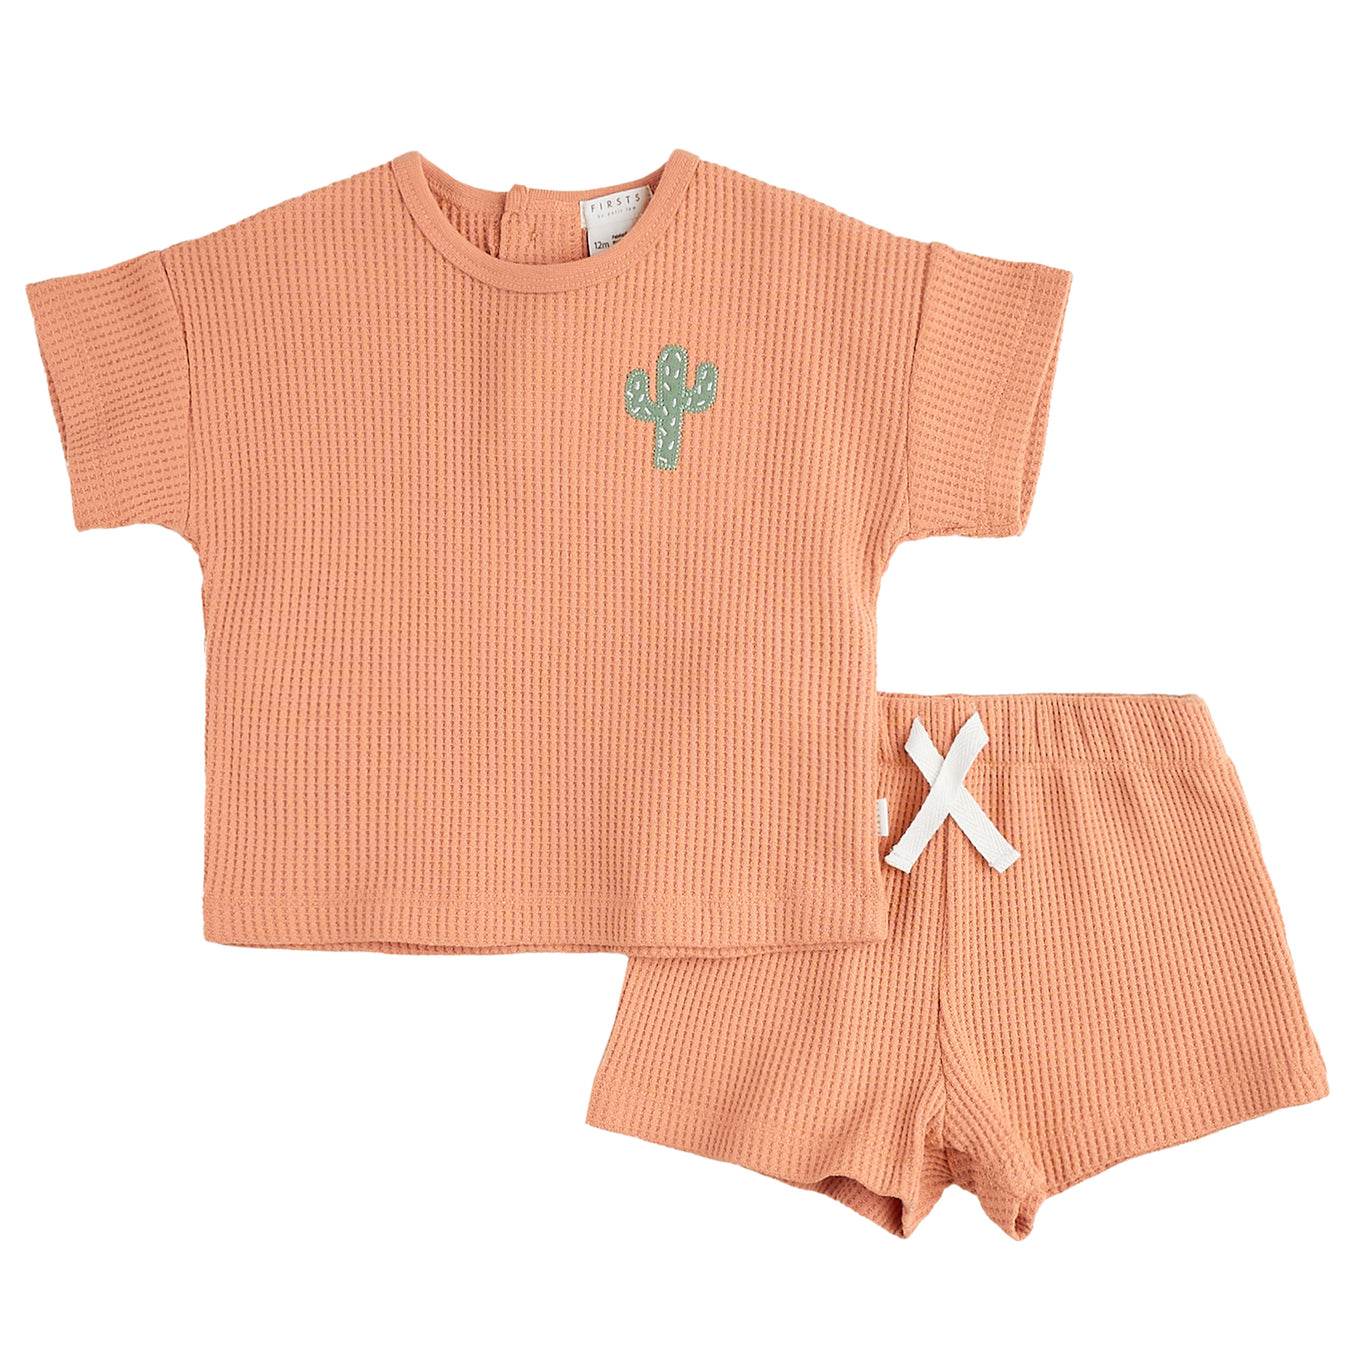 Unisex - Sets - Two Piece Outfits